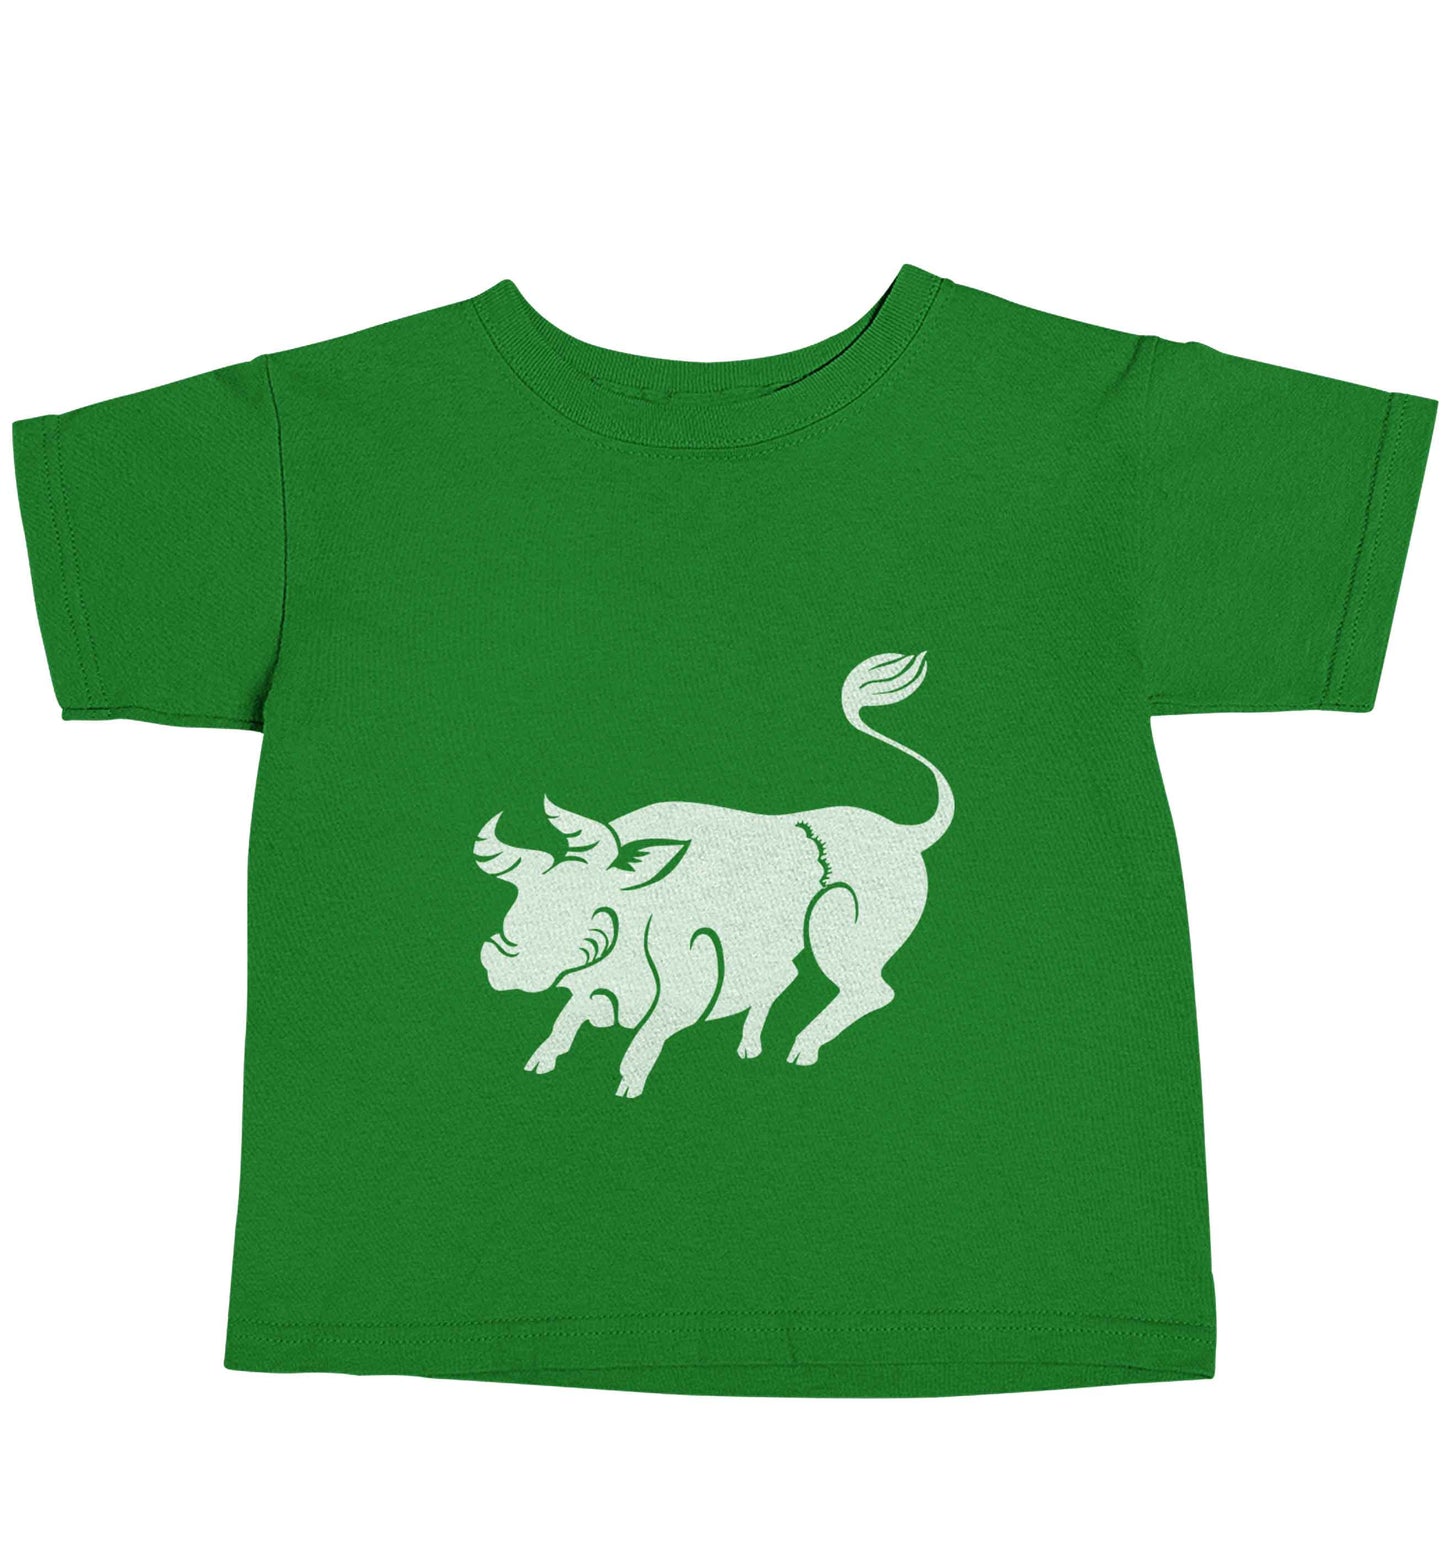 Blue ox green baby toddler Tshirt 2 Years